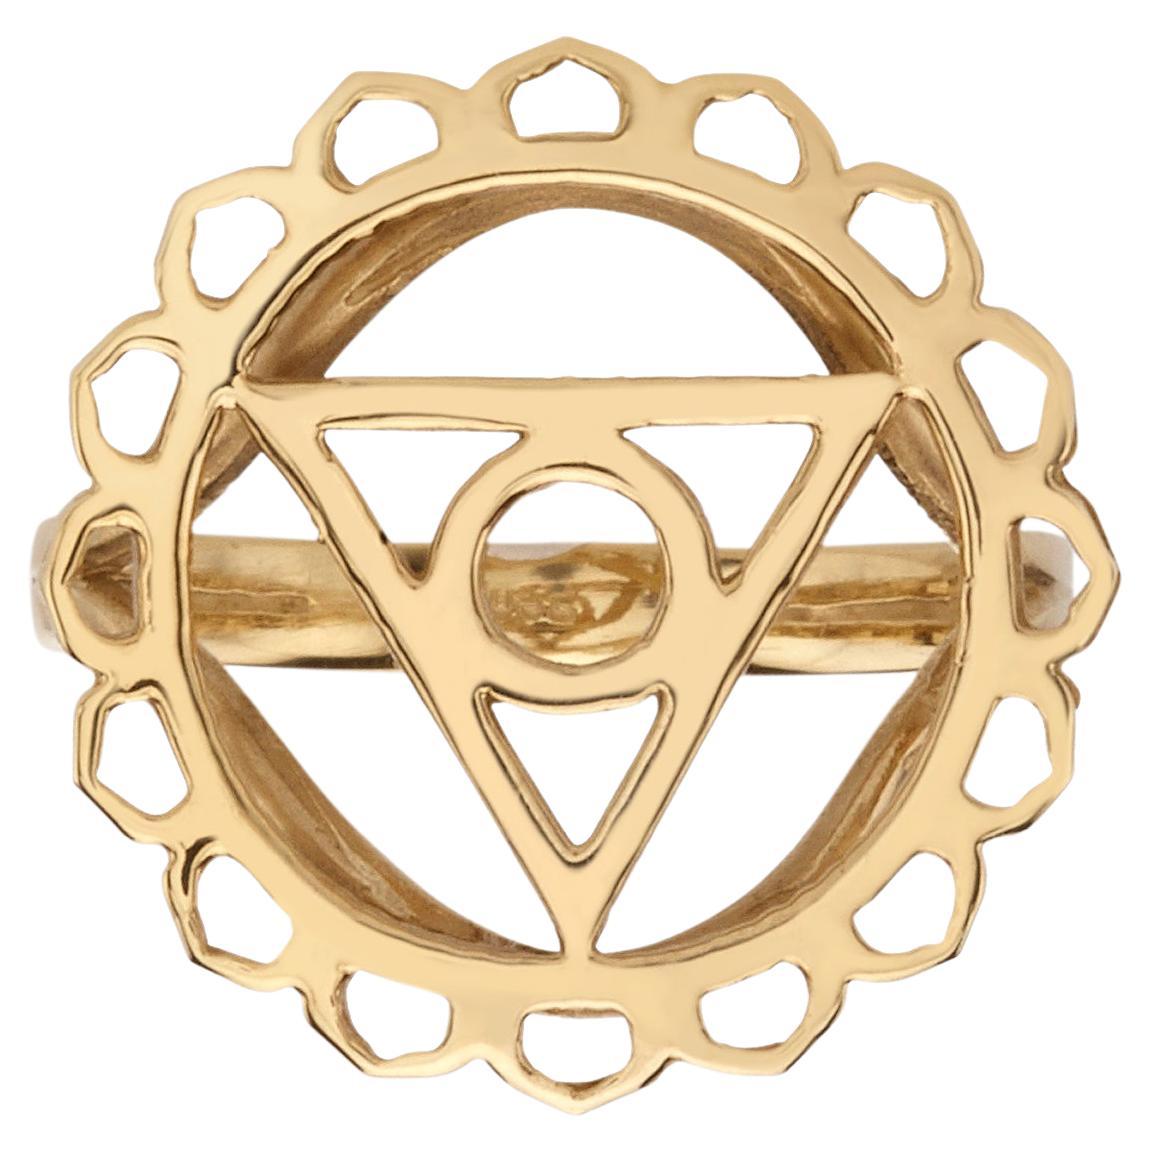 For Sale:  Handcrafted Yoga Ring with the Vissuddha Throat Chakra in 14Kt Gold